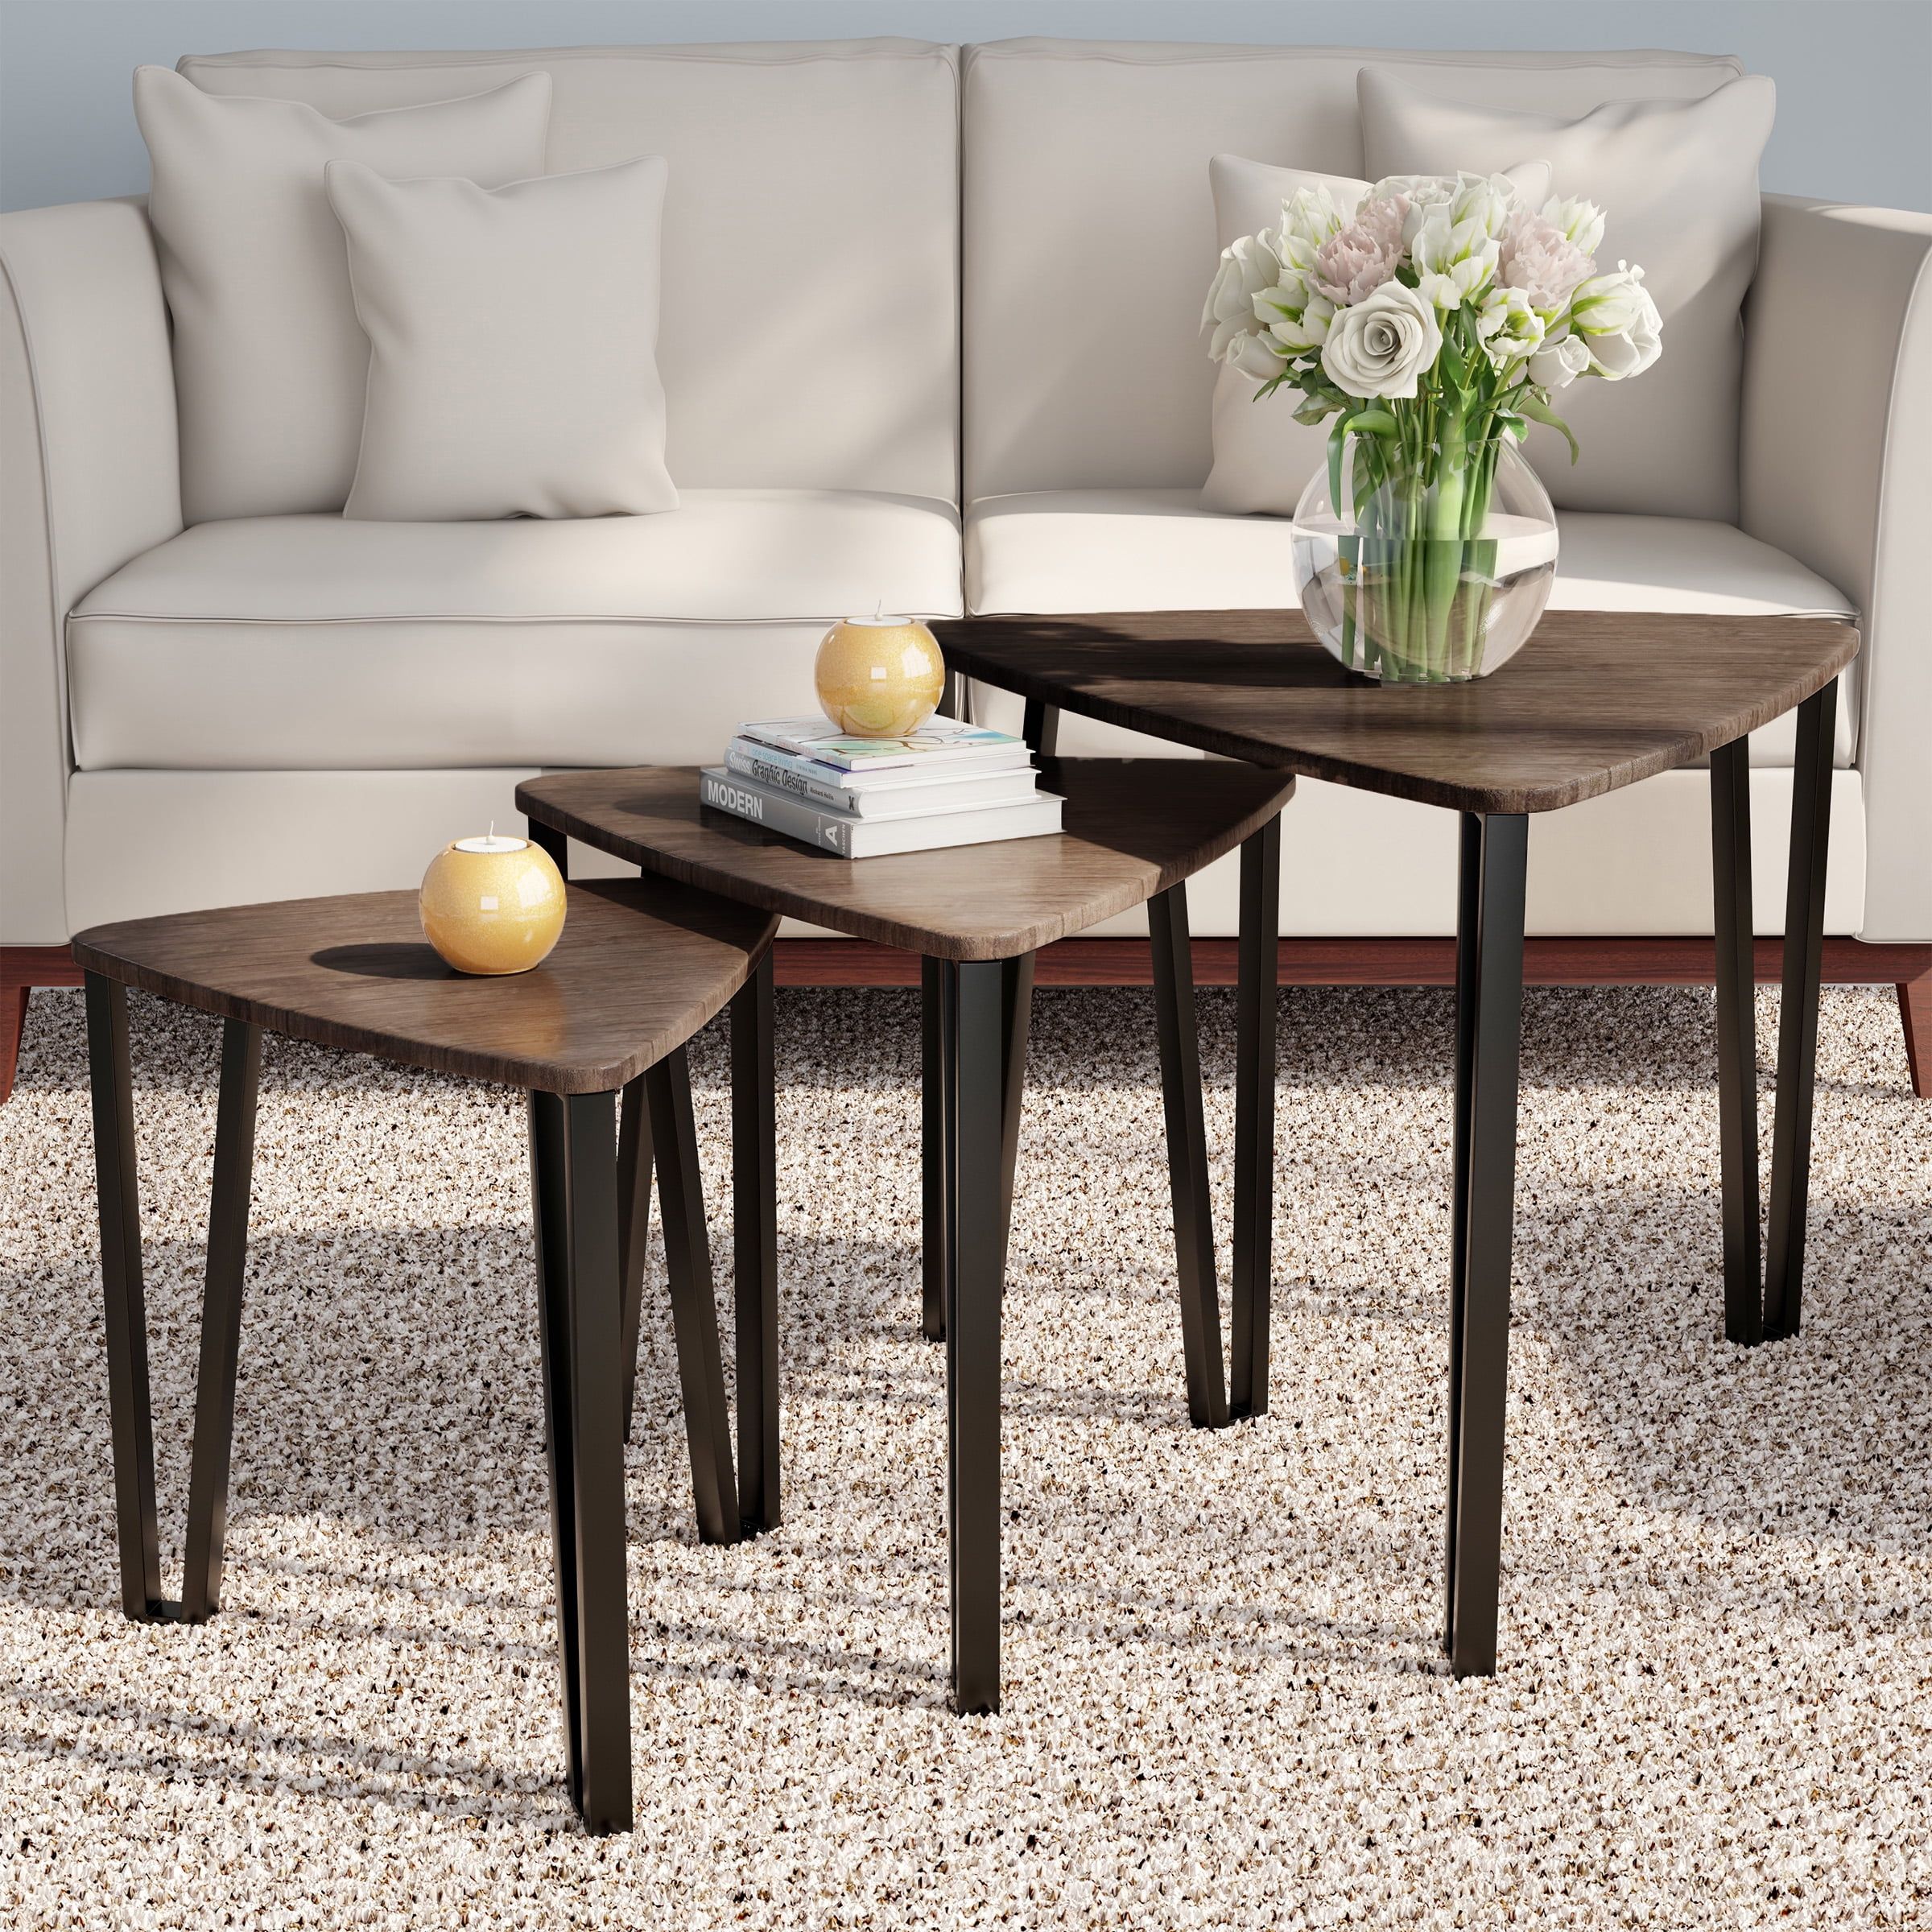 Nesting Tables Set Of 3 Modern Woodgrain Look For Living Room Coffee Regarding Coffee Tables Of 3 Nesting Tables (Photo 7 of 15)